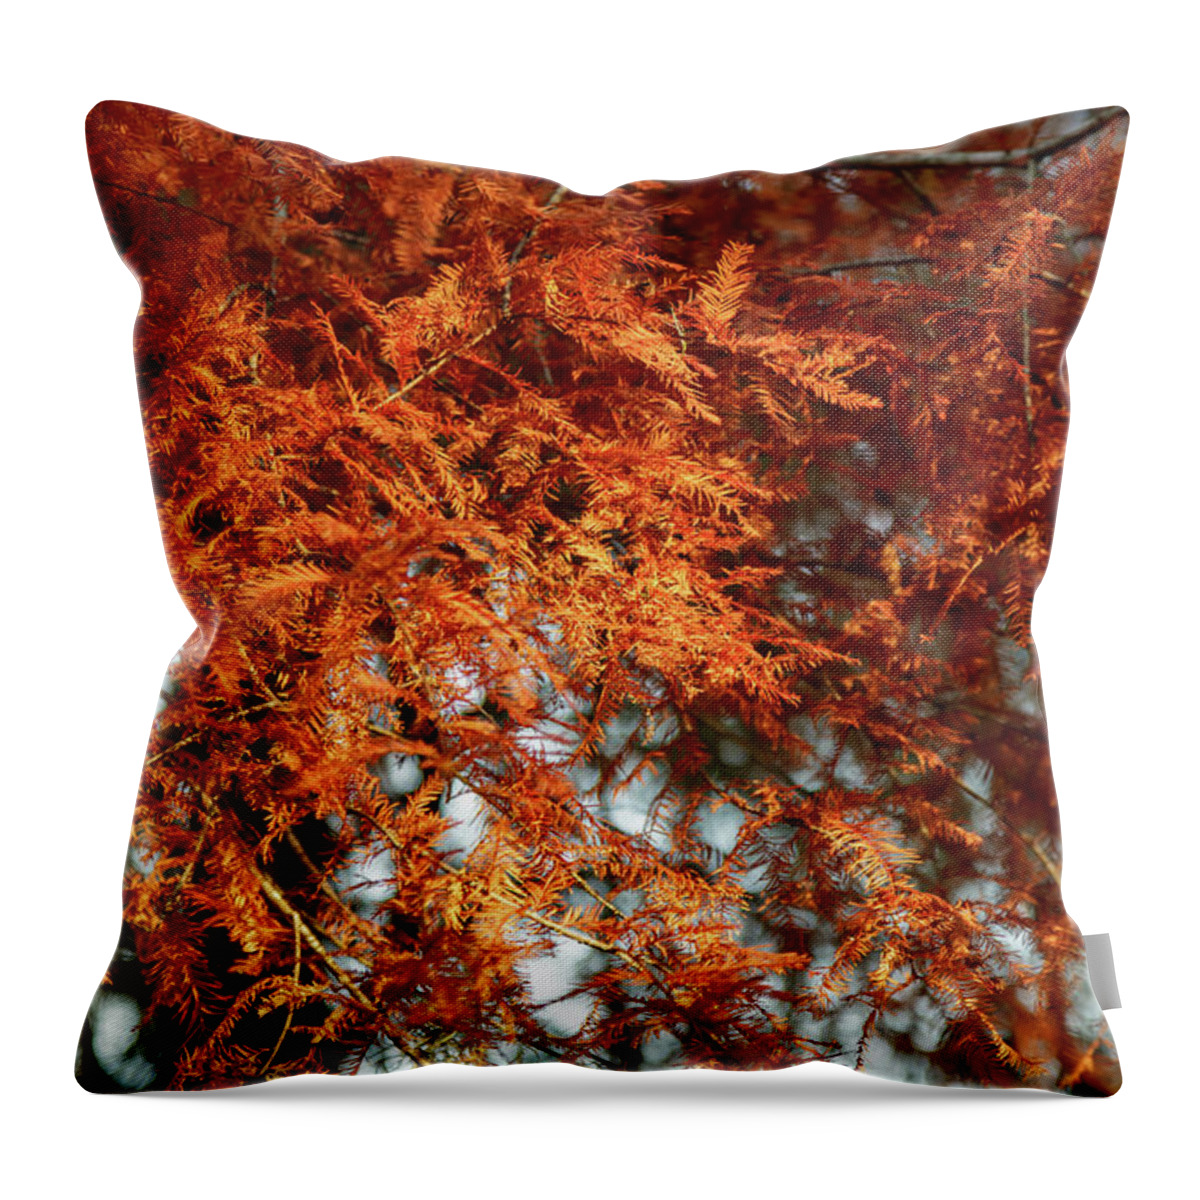 Tree Throw Pillow featuring the photograph Bald Cypress In Autumn by Mike Schaffner